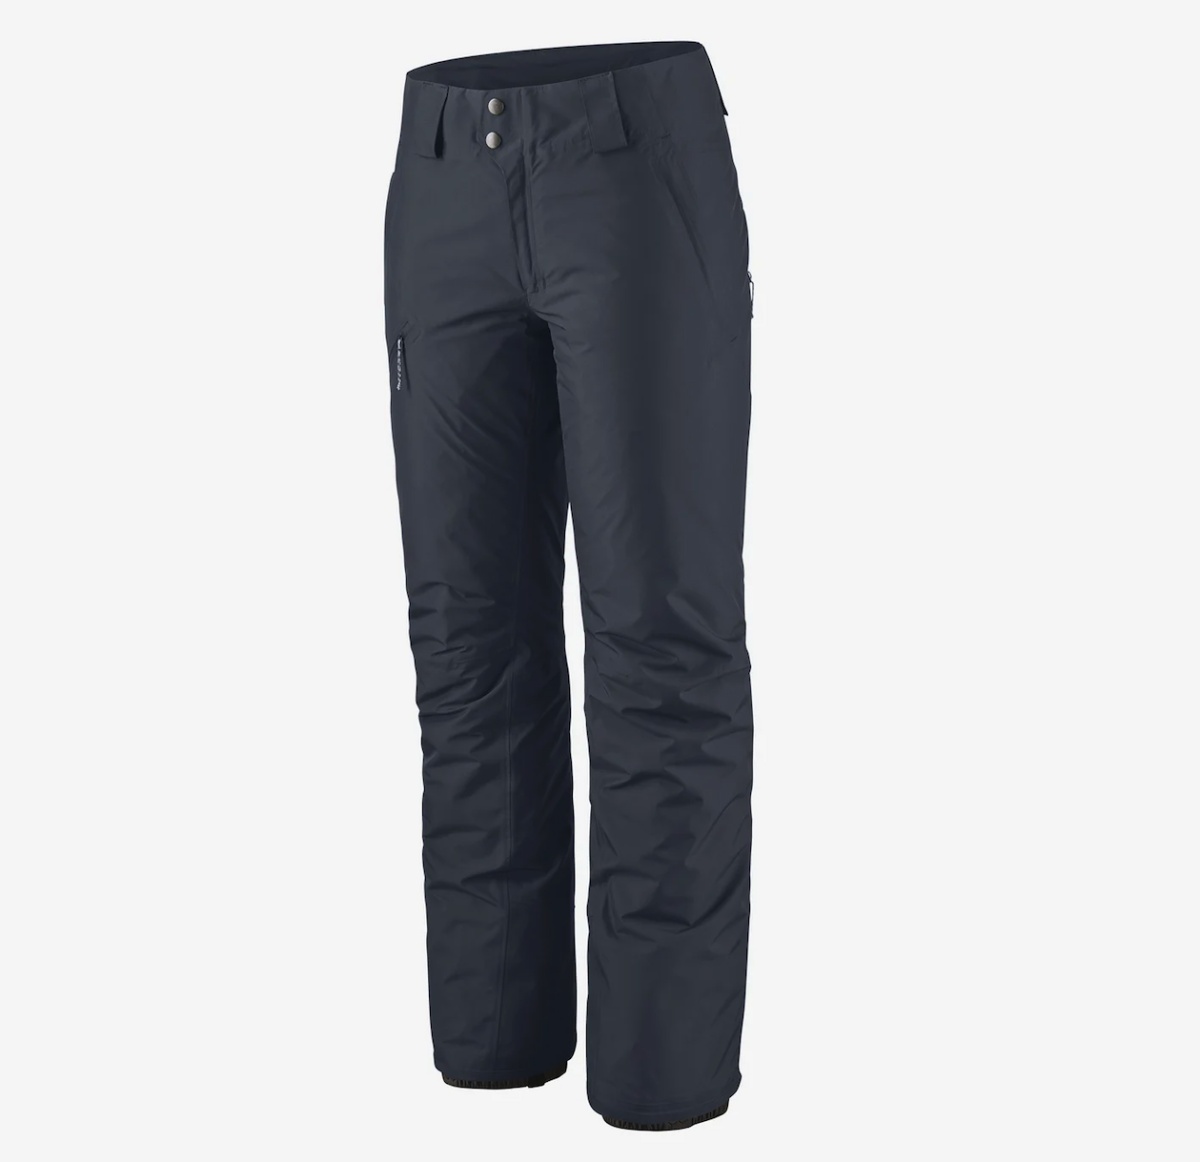 Patagonia Insulated Powder Town Pants - Women's Review (Patagonia Insulated Powder Town Pant Women's)